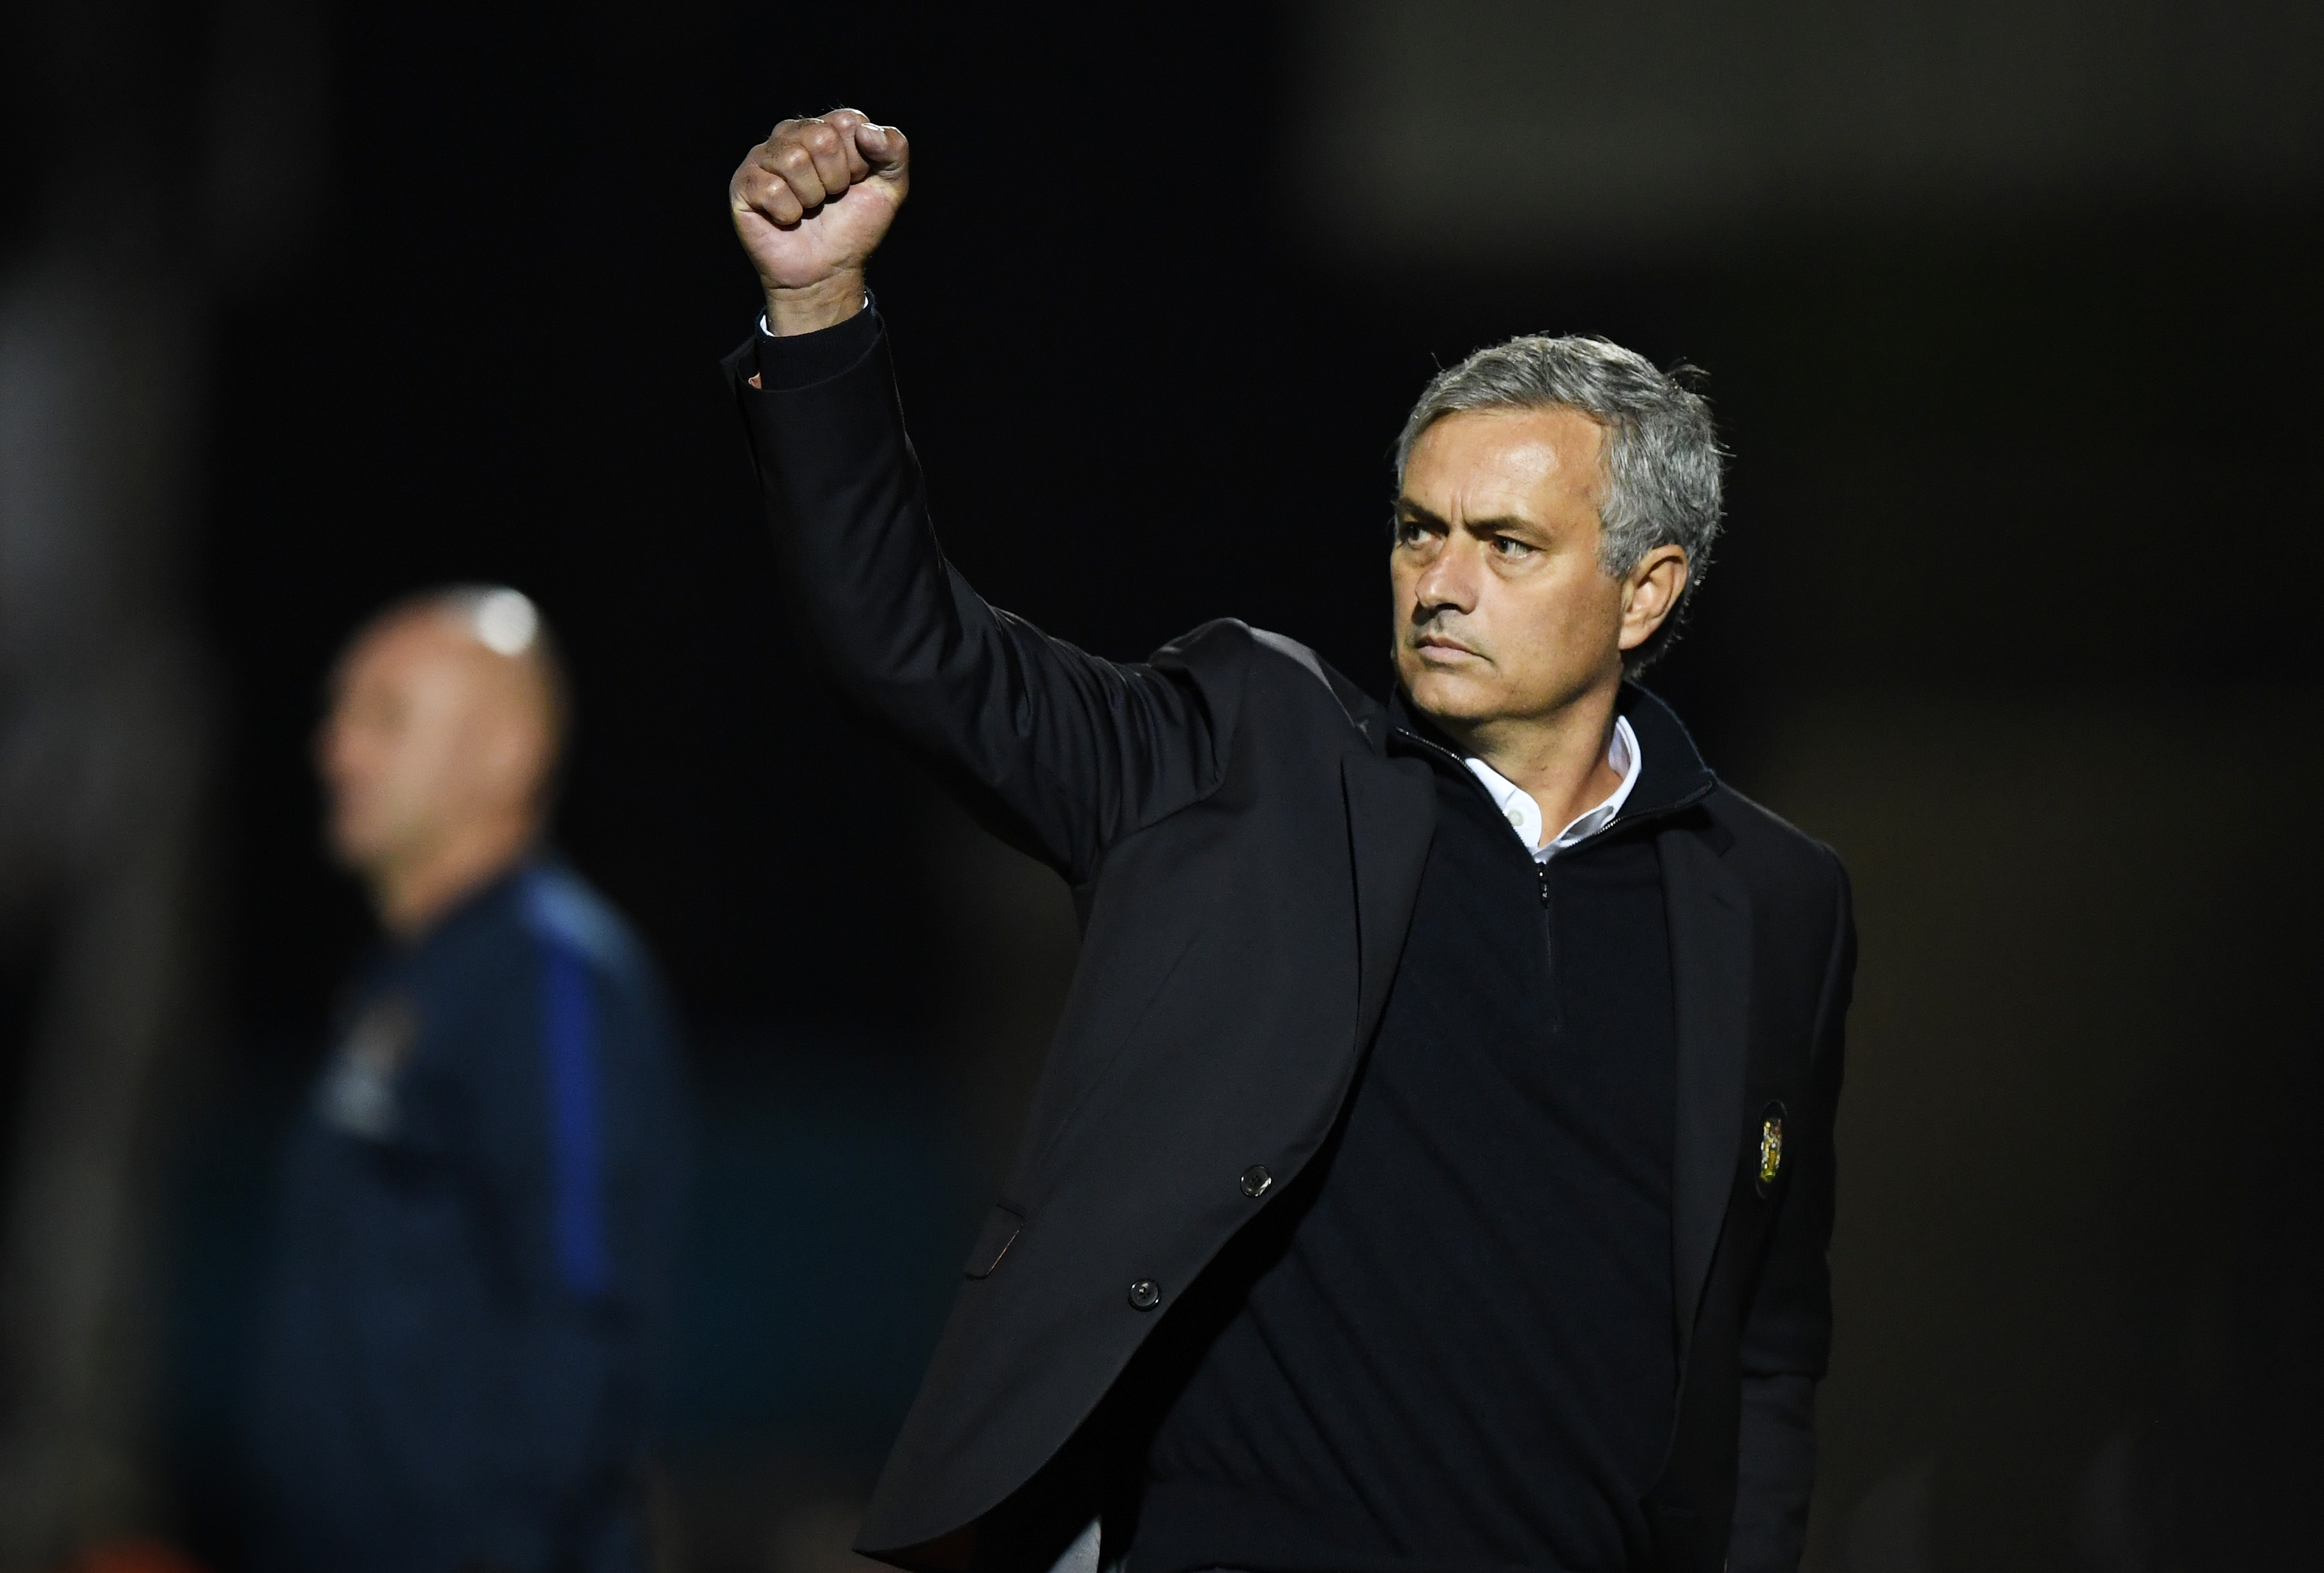 NORTHAMPTON, ENGLAND - SEPTEMBER 21: Jose Mourinho, Manager of Manchester United celebrates during the  EFL Cup Third Round match between Northampton Town and Manchester United at Sixfields on September 21, 2016 in Northampton, England.  (Photo by Shaun Botterill/Getty Images)